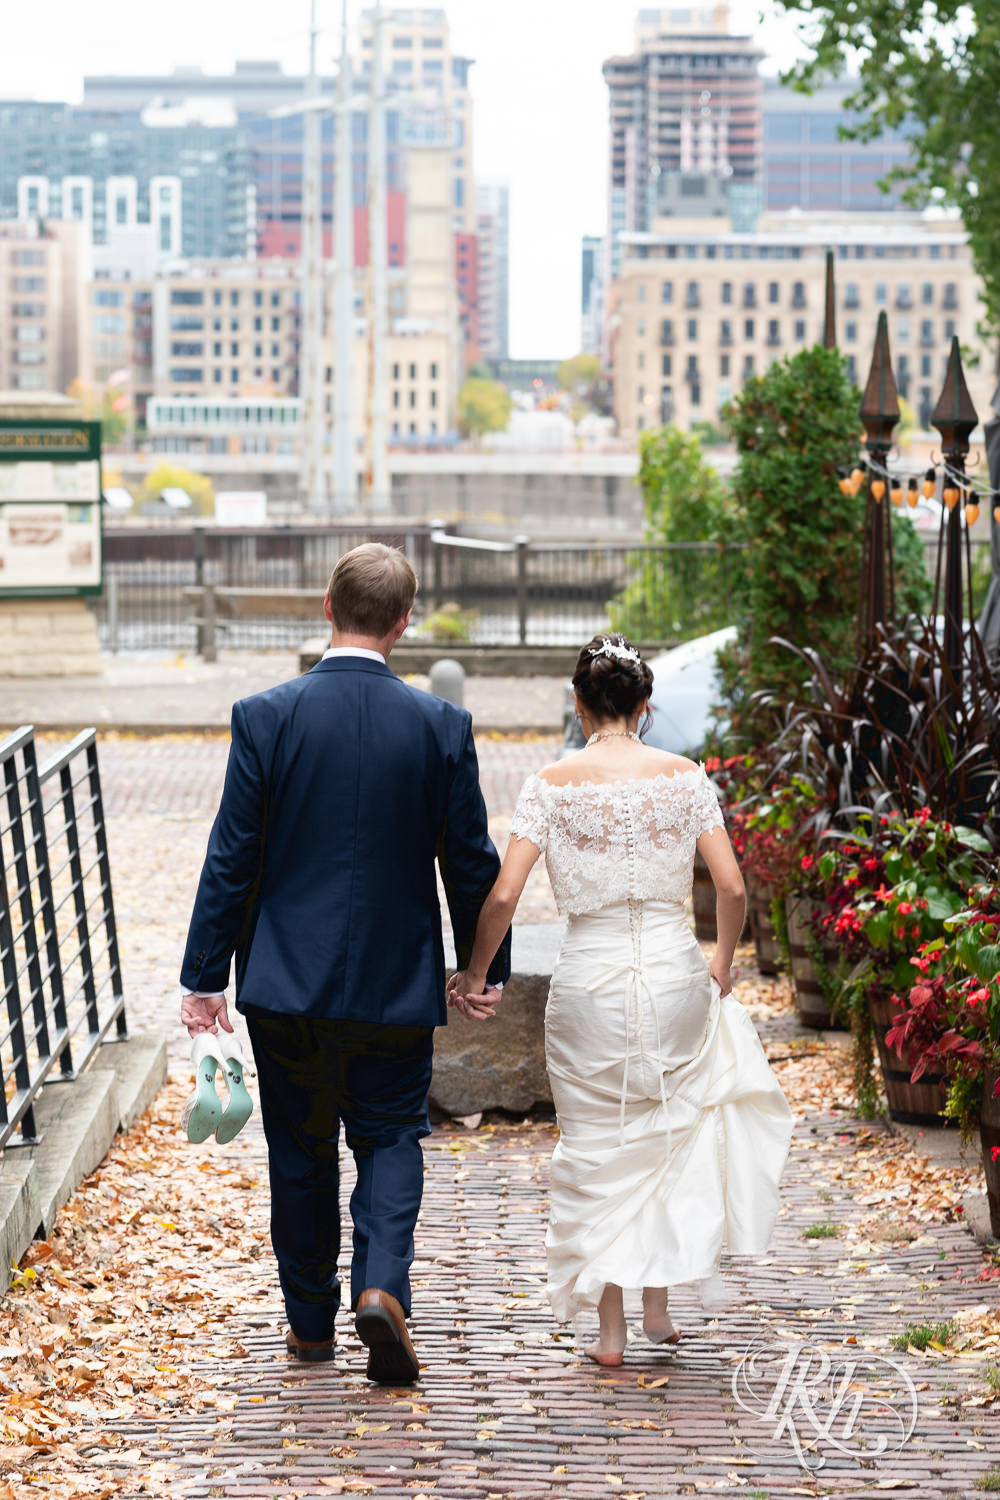 Bride and groom walk toward the city on wedding day at The Grand 1858 in Minneapolis, Minnesota.